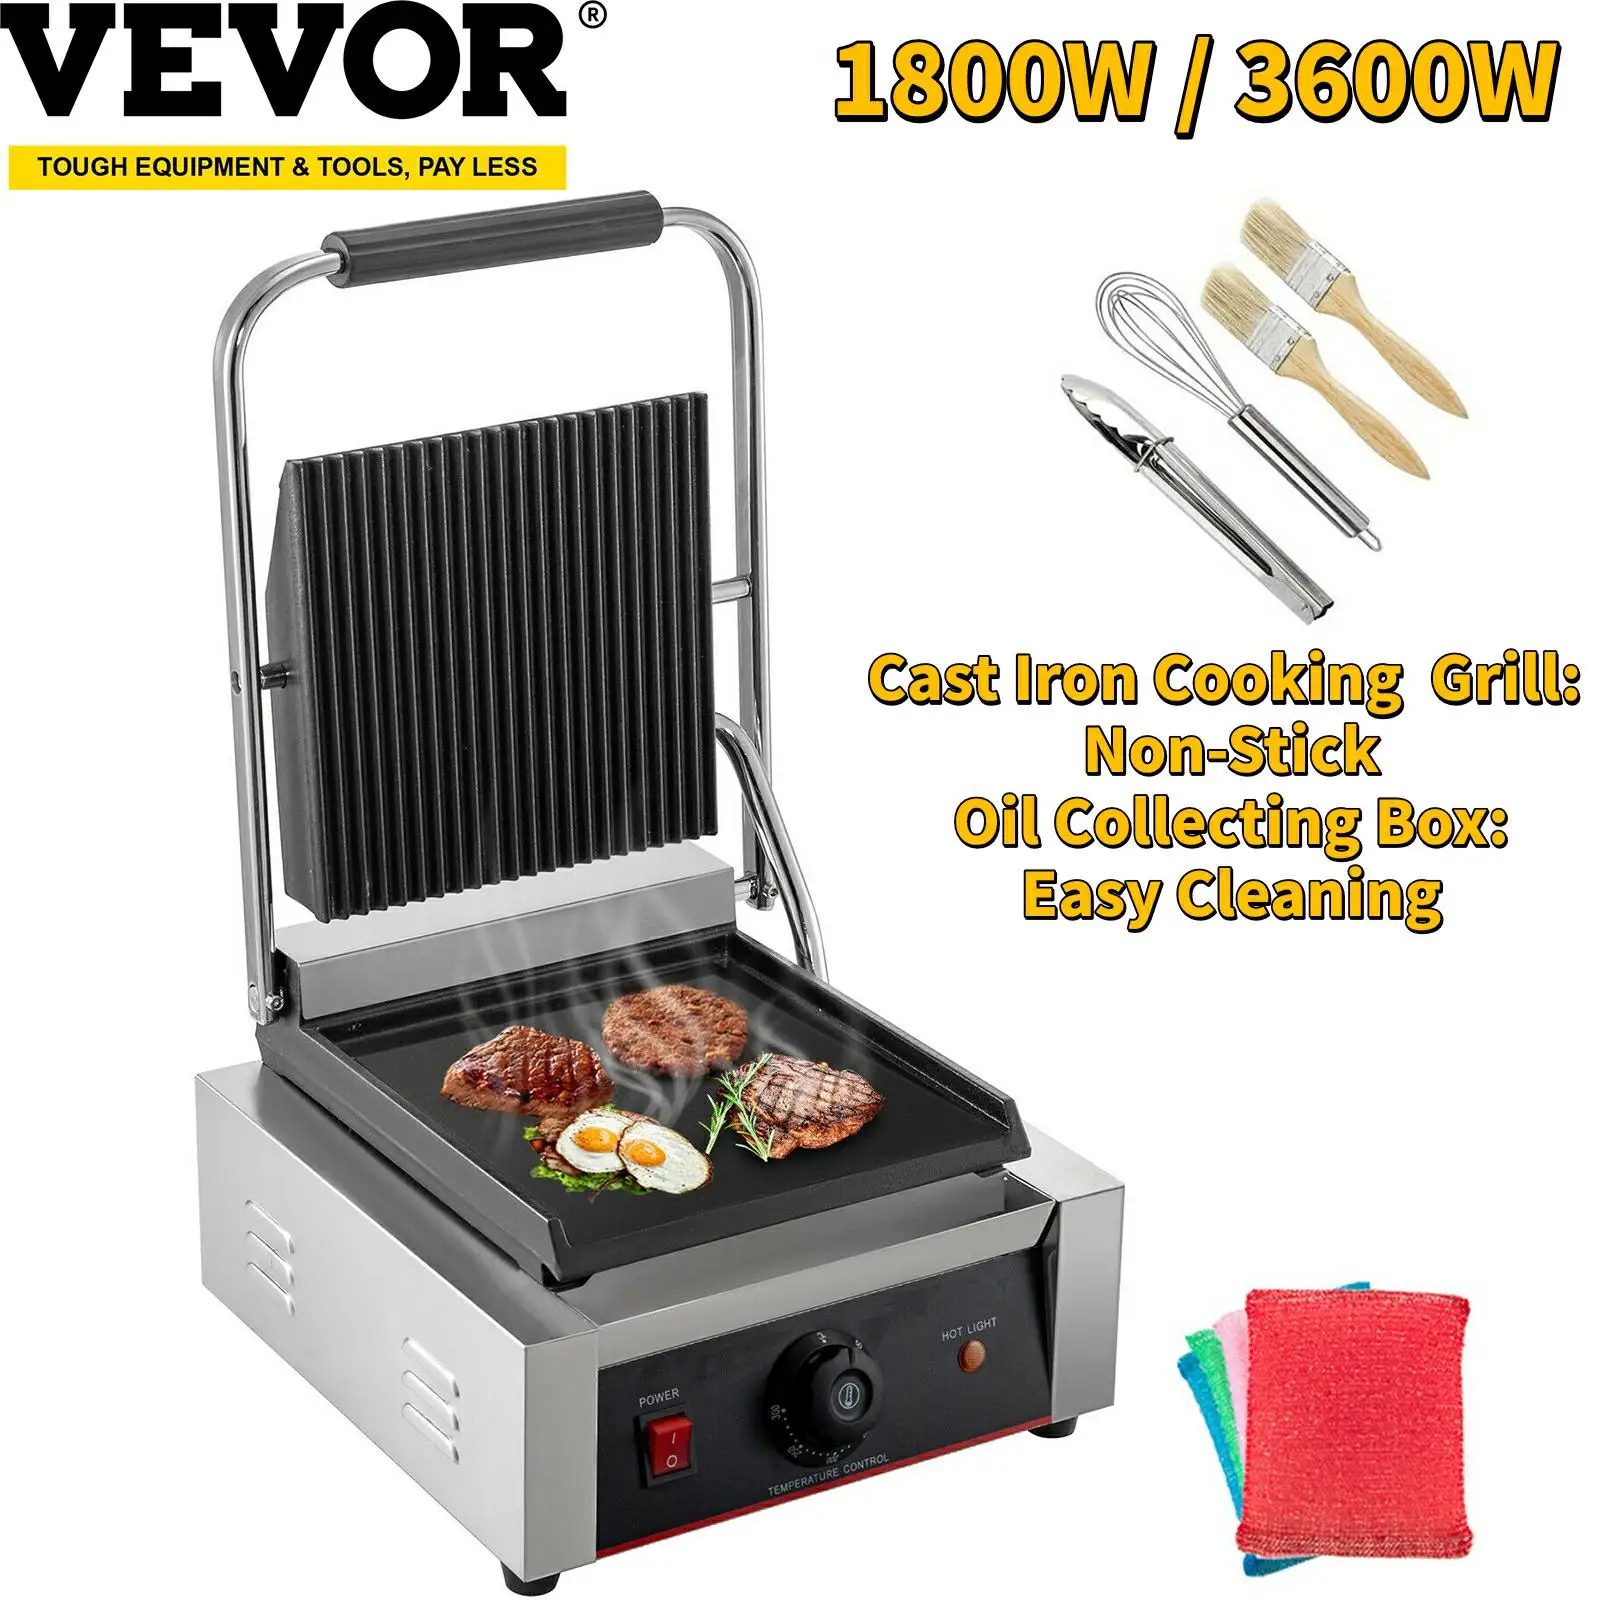 vevor electric contact grill griddle commercial panini press grill non stick for cooking sandwiches steak meat scrambled eggs free global shipping